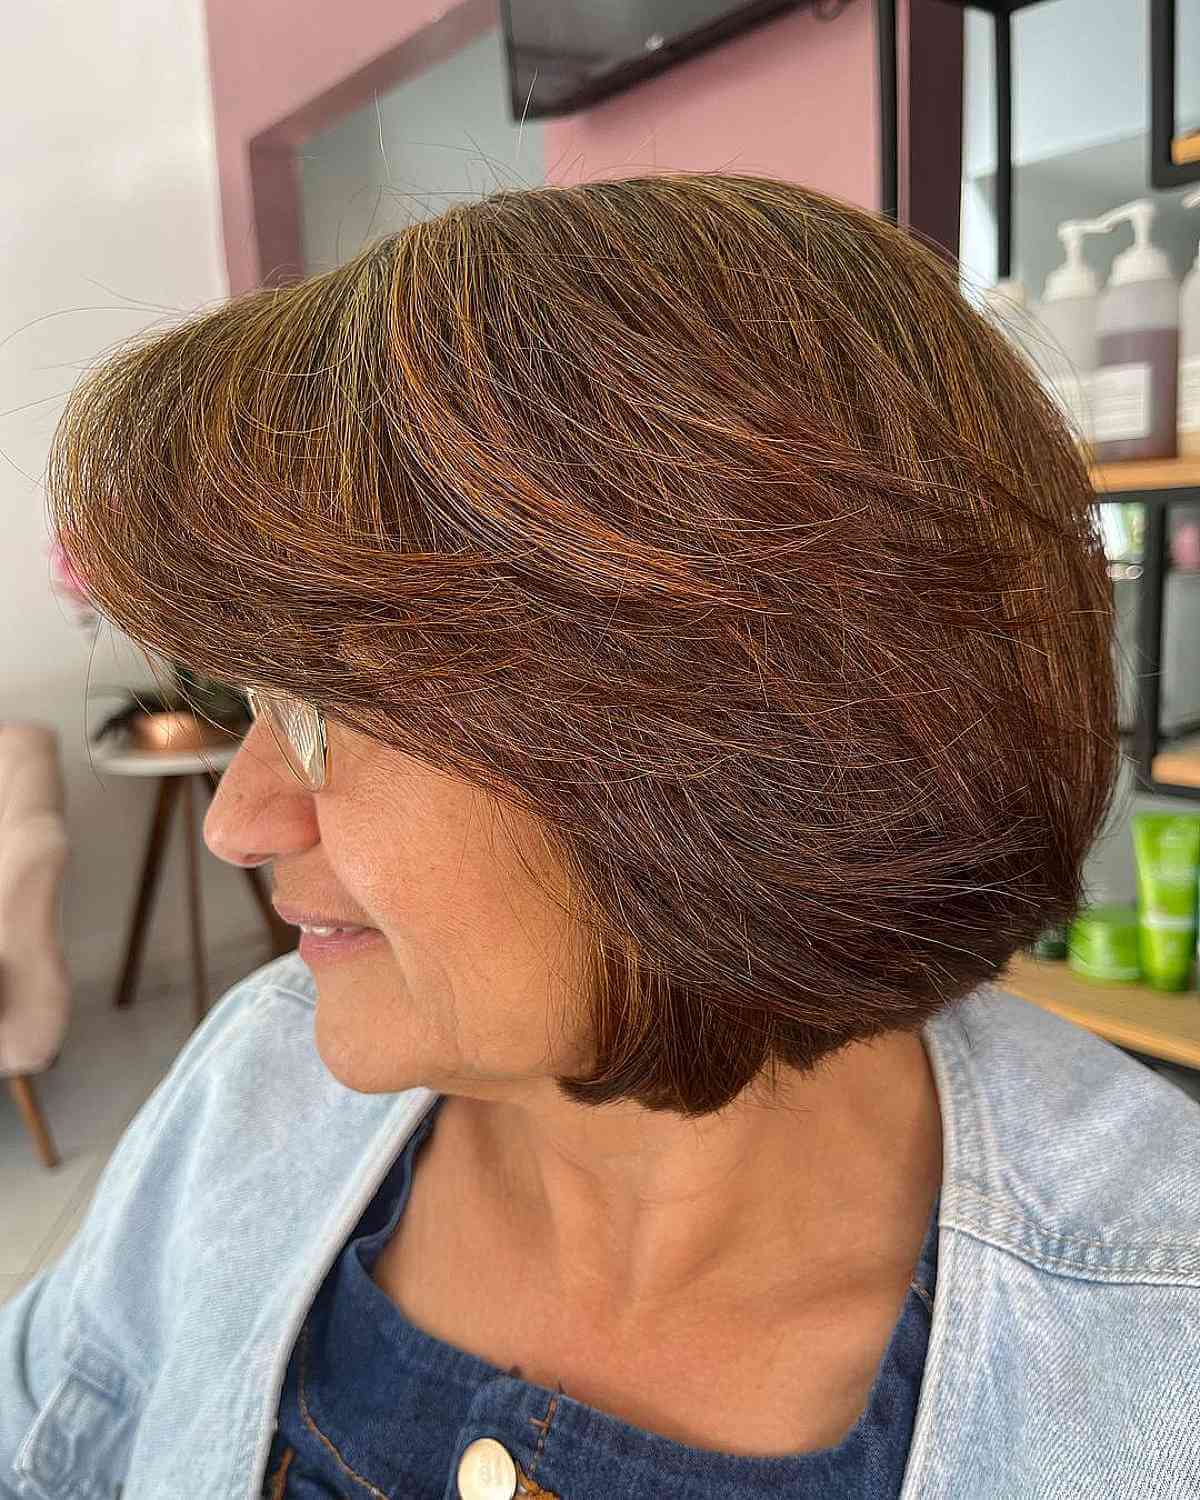 Short Bob with Side Bangs and Subtle Layers for Women in Their 40s